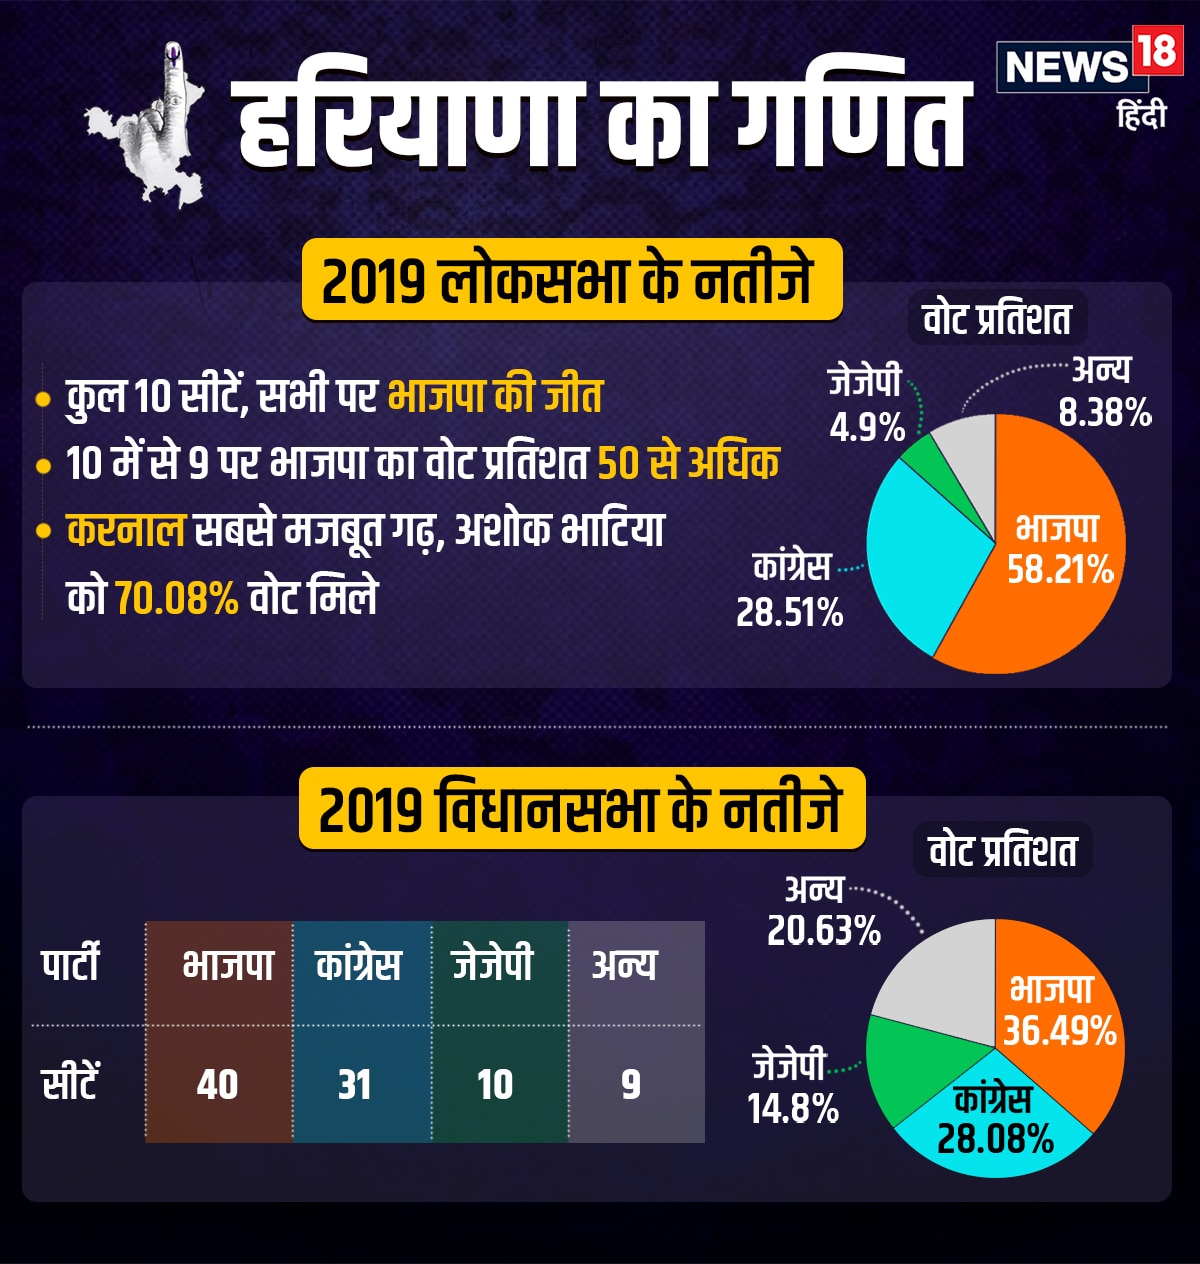 Which political party won the 1991 election of Haryana, Which party won the Assembly election of Haryana in 1987, Which political party was ruling the state of Haryana in year 1985, rohtak lok sabha seat, deepender hooda, and bjp chaudhary devi lal was defeated three times